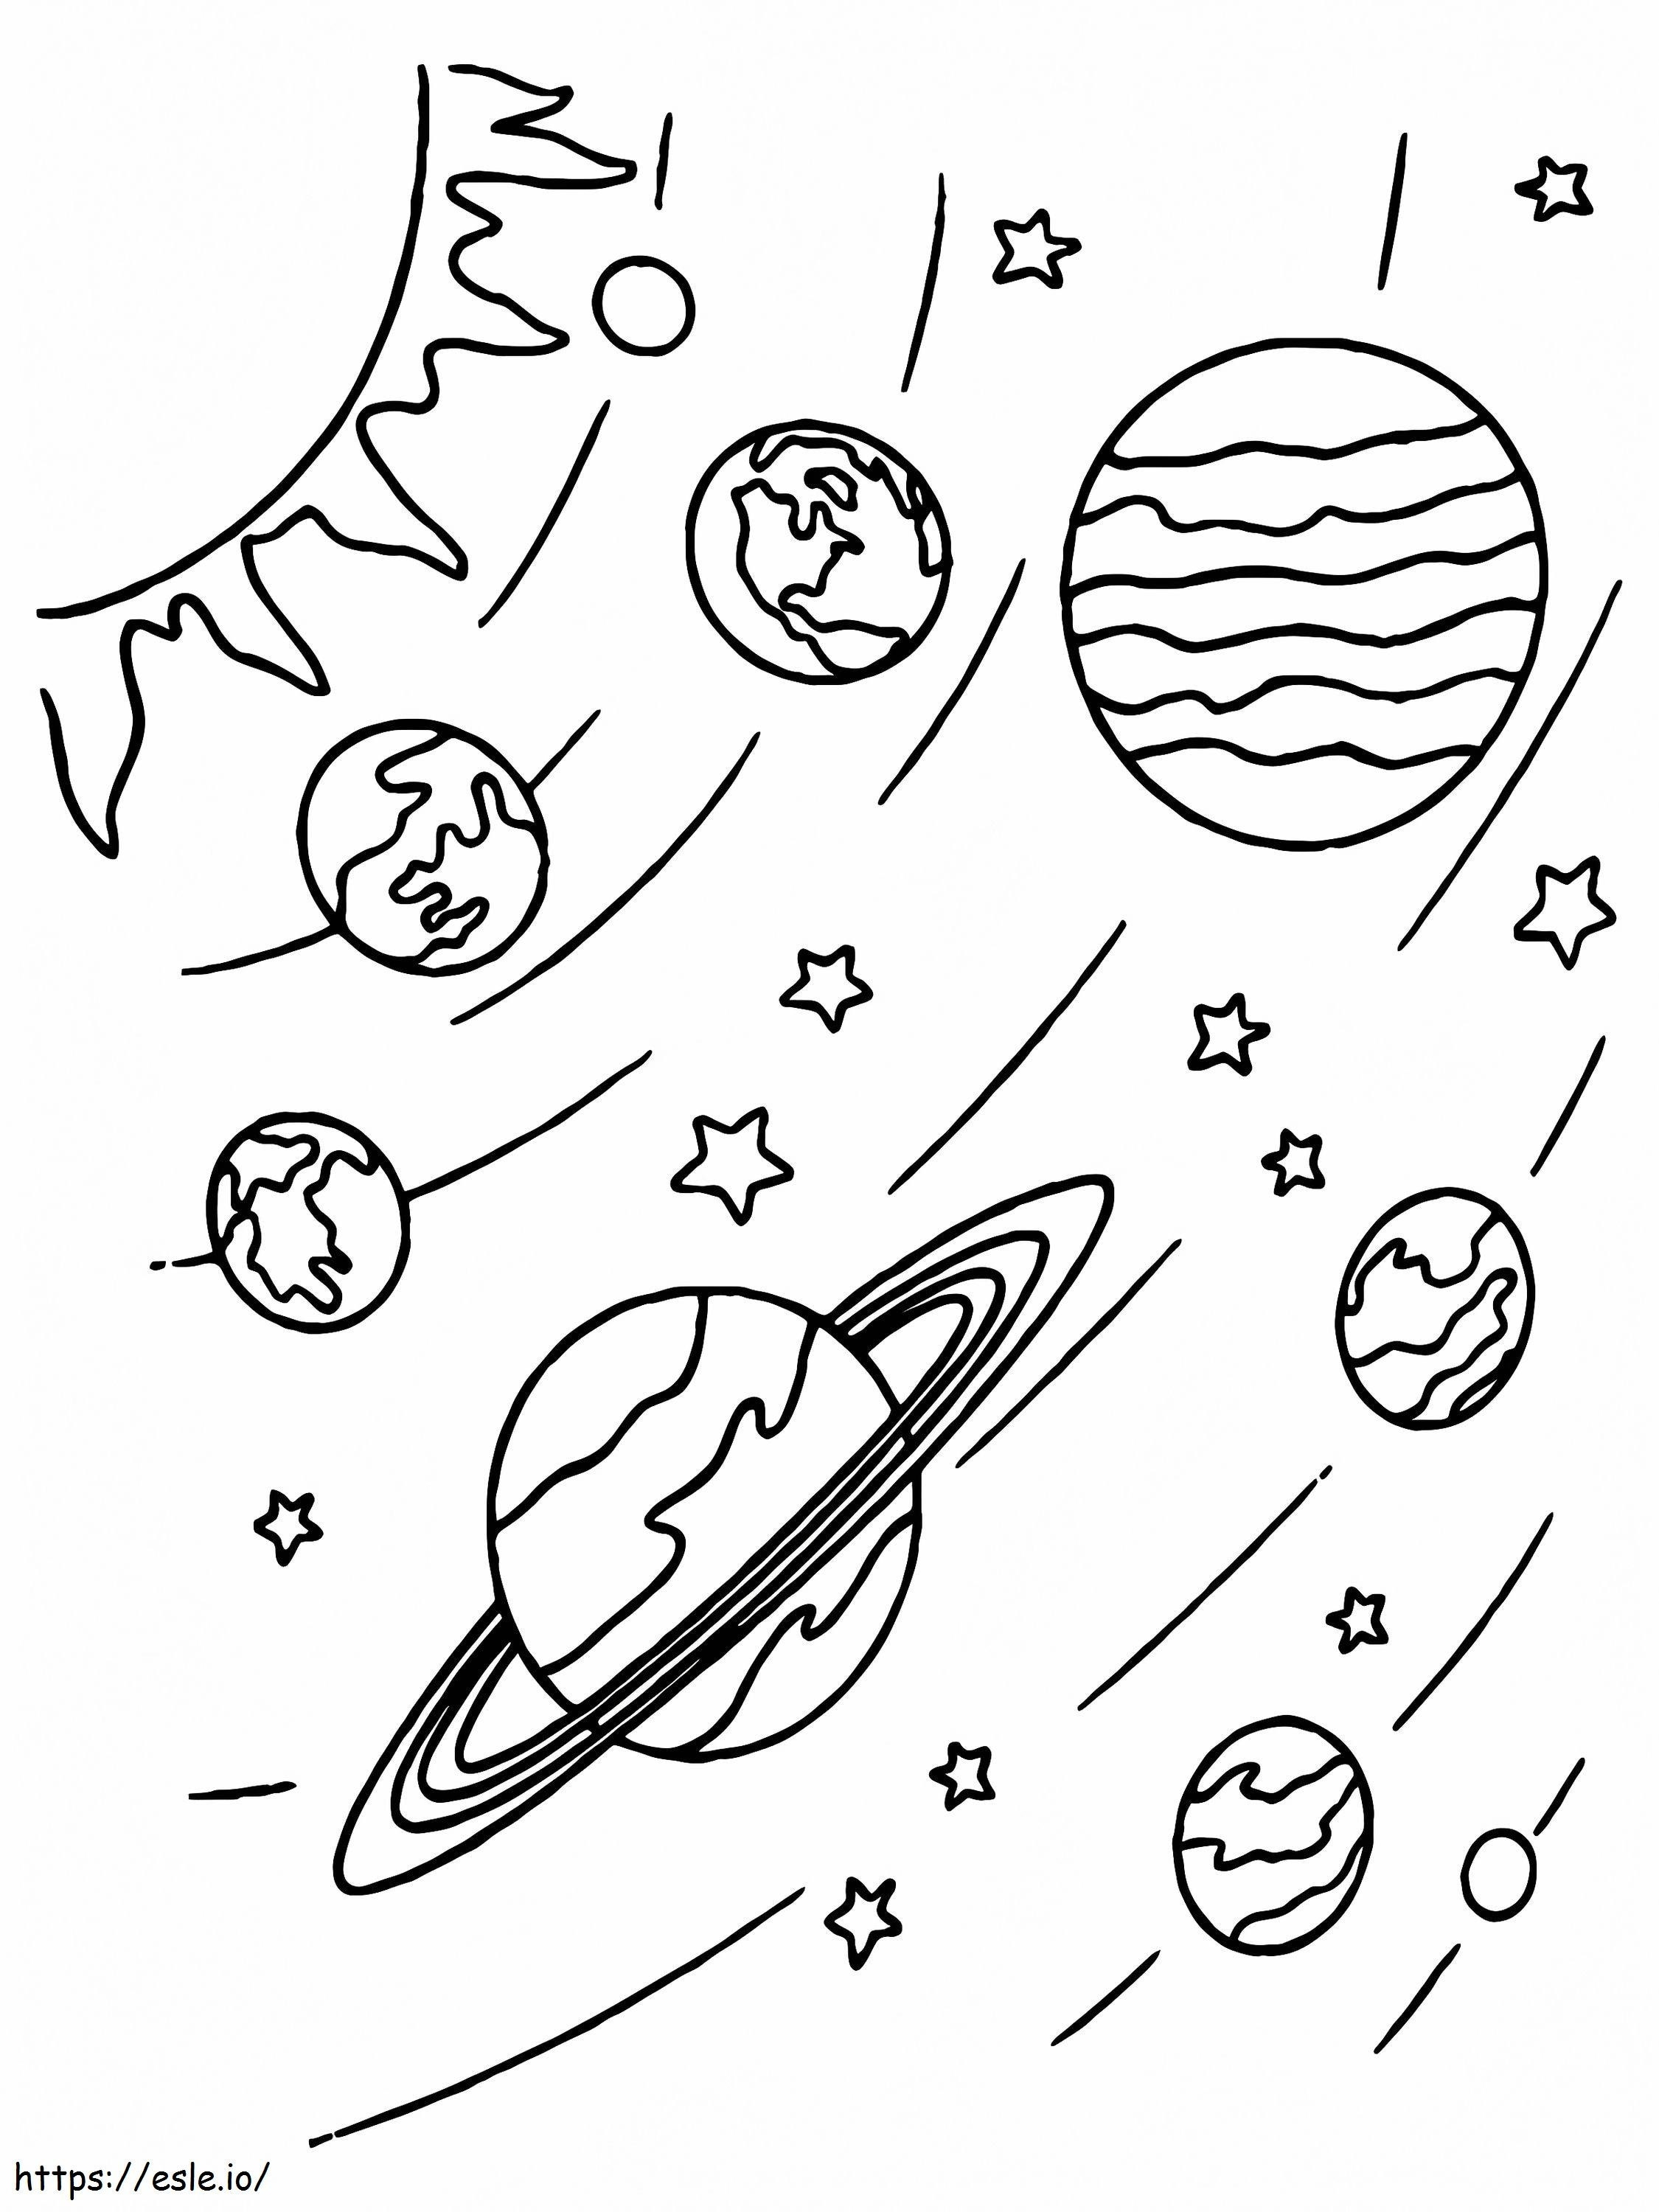 Simple Planets Of The Solar System coloring page